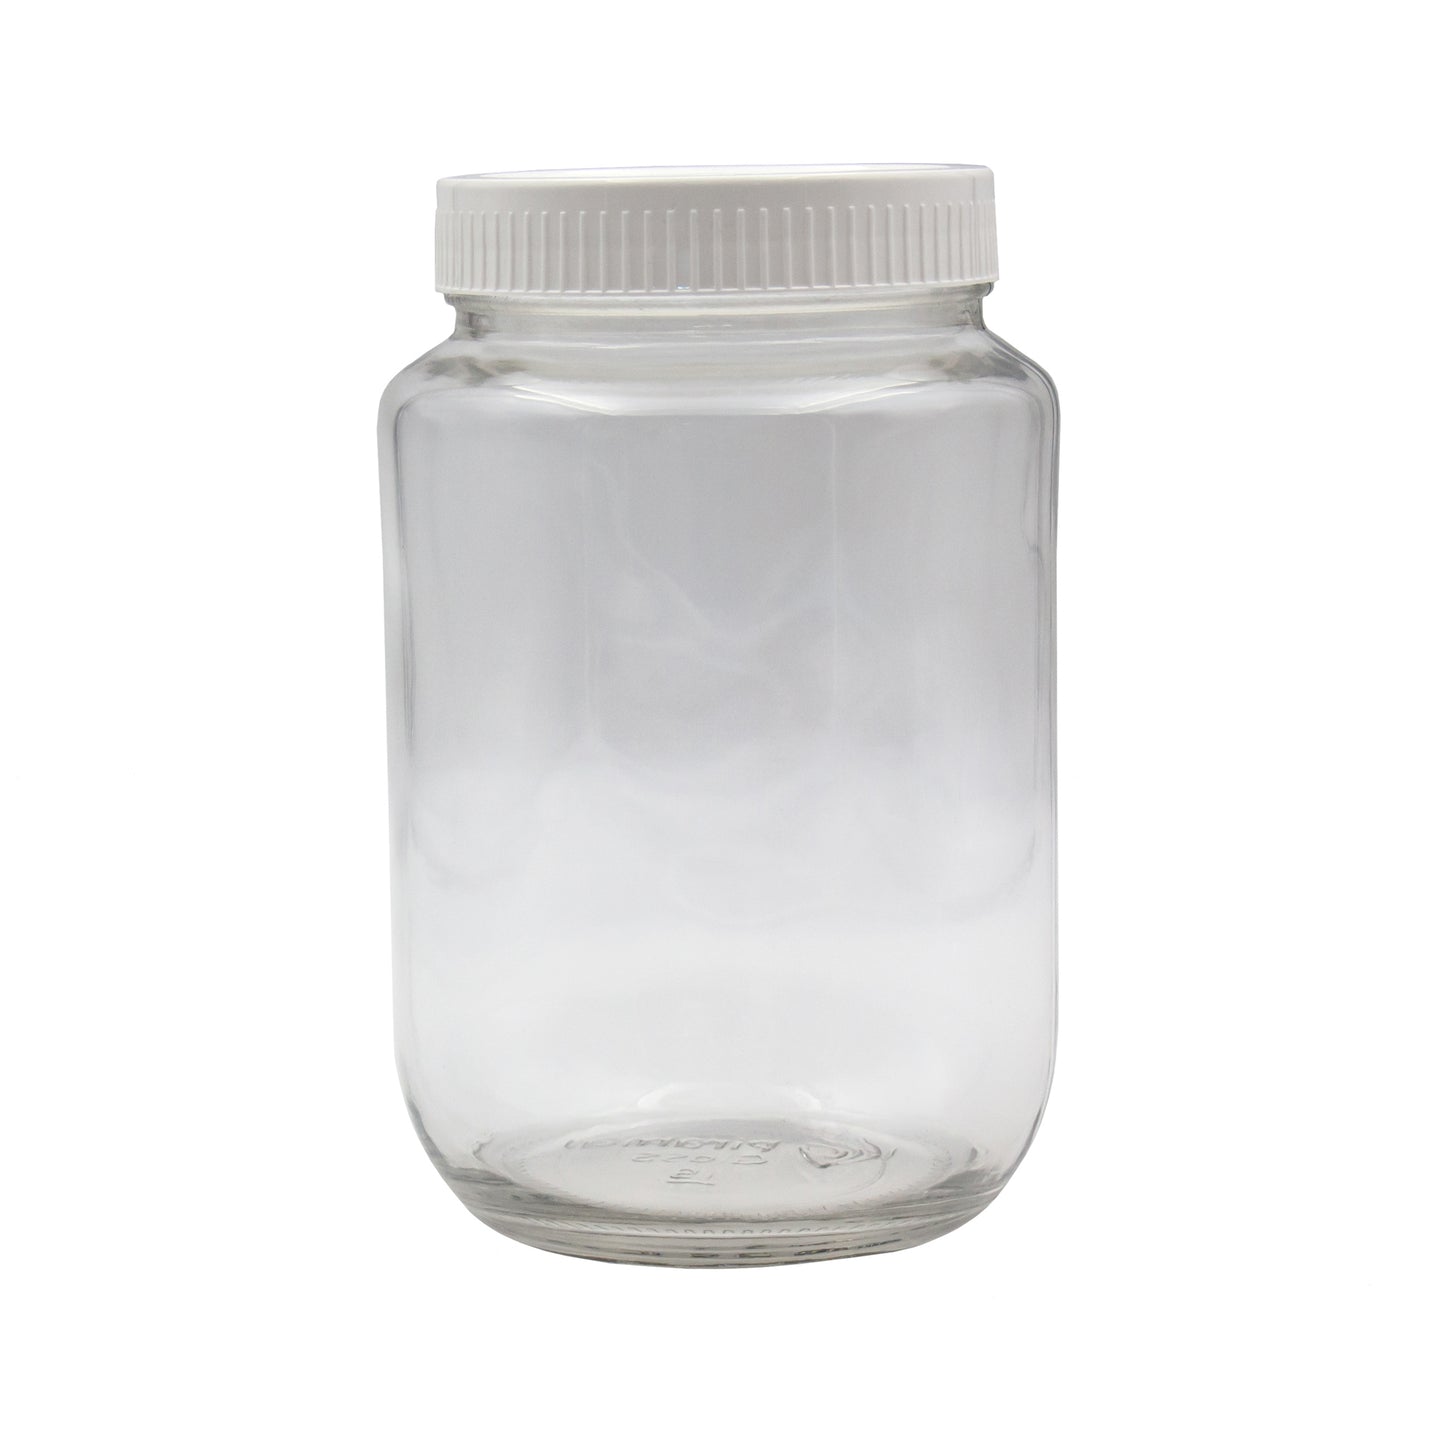 1.5 litre glass jar with white plastic lid